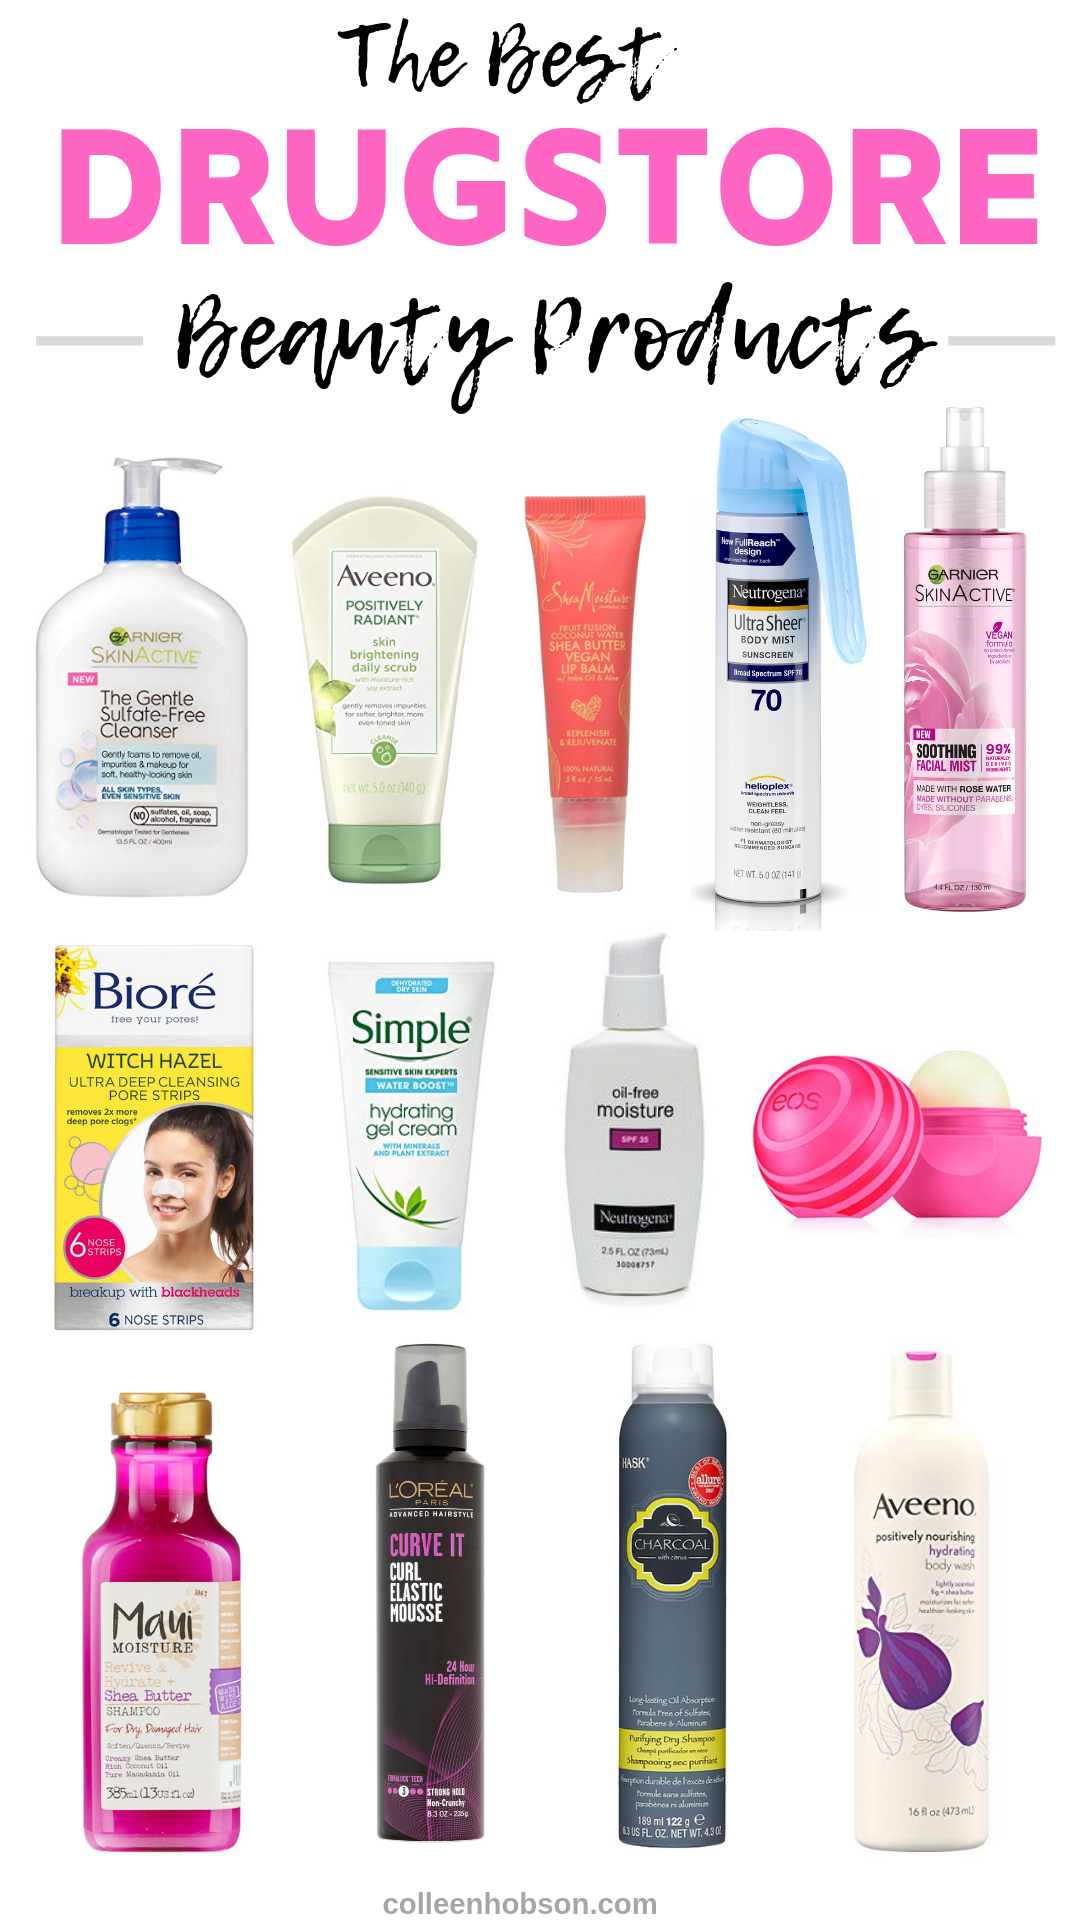 The Best Drugstore Beauty Products - The Best Drugstore Beauty Products -   9 beauty Products skin care ideas